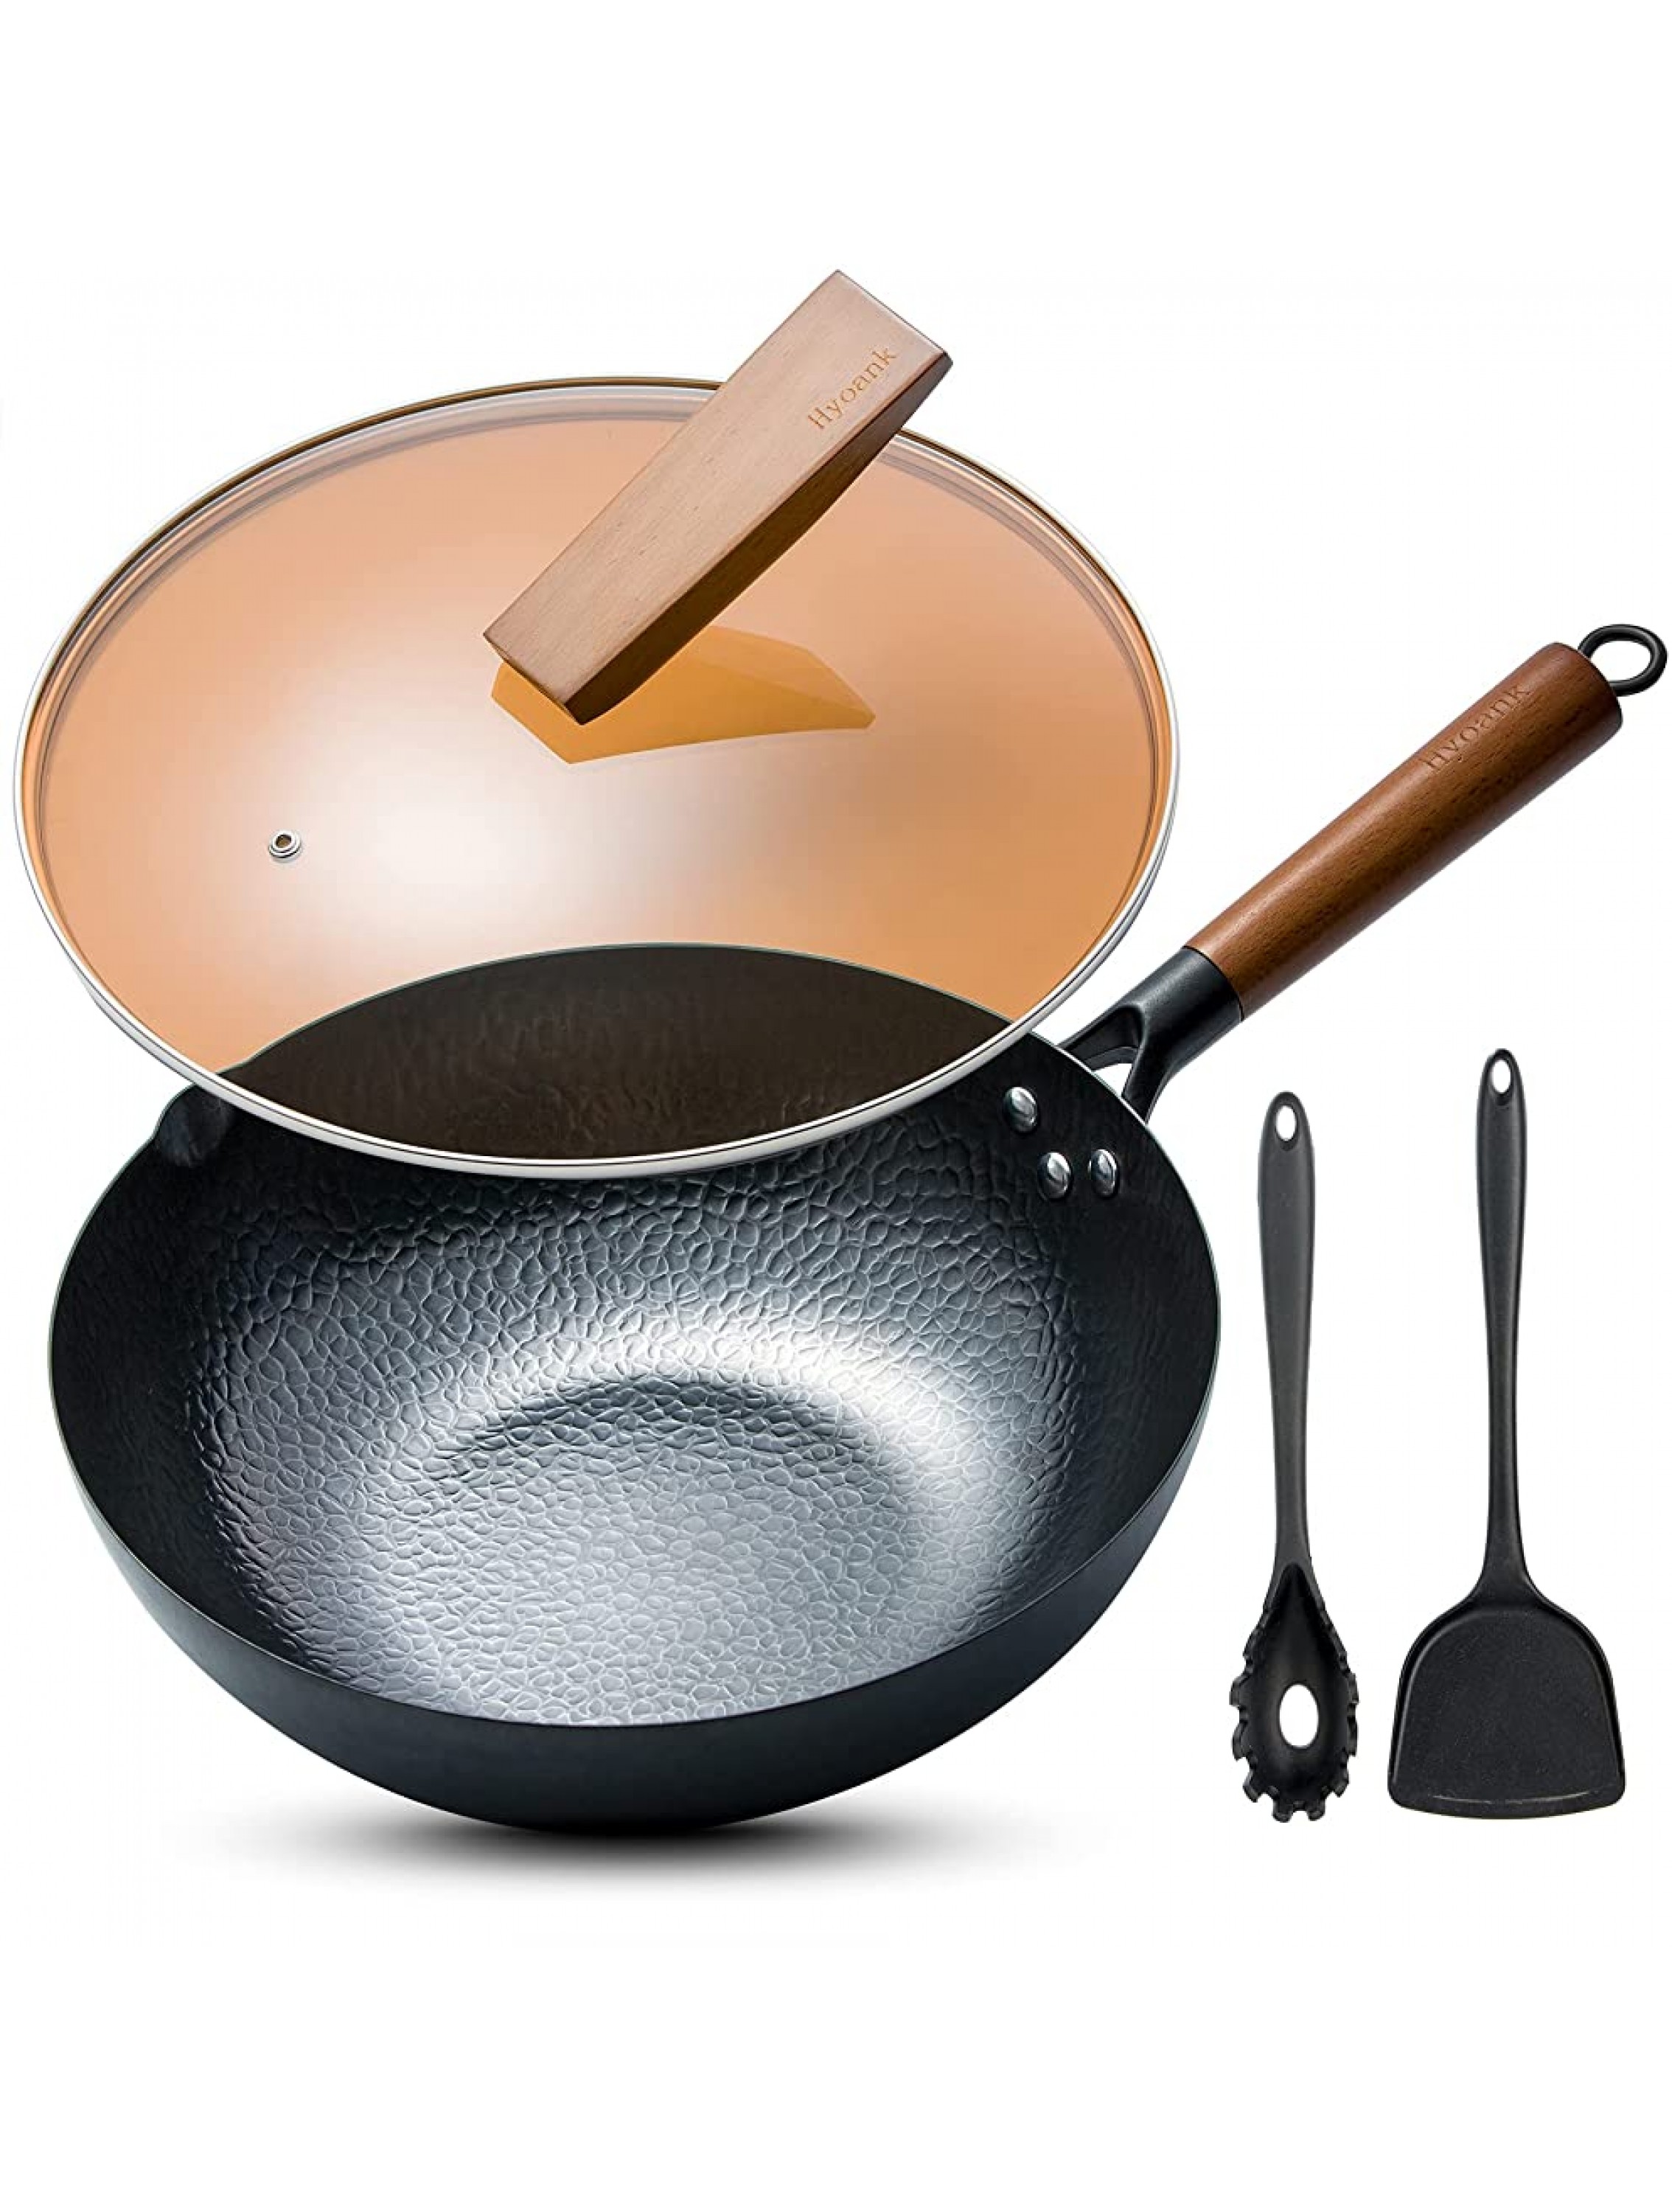 Hyoank Carbon Steel Wok Pan 12.5 Woks and Stir Fry Pans with Spatula and Pasta Server Wok with Lid Suits for all StovesFlat Bottom Wok… - B8B07C78L